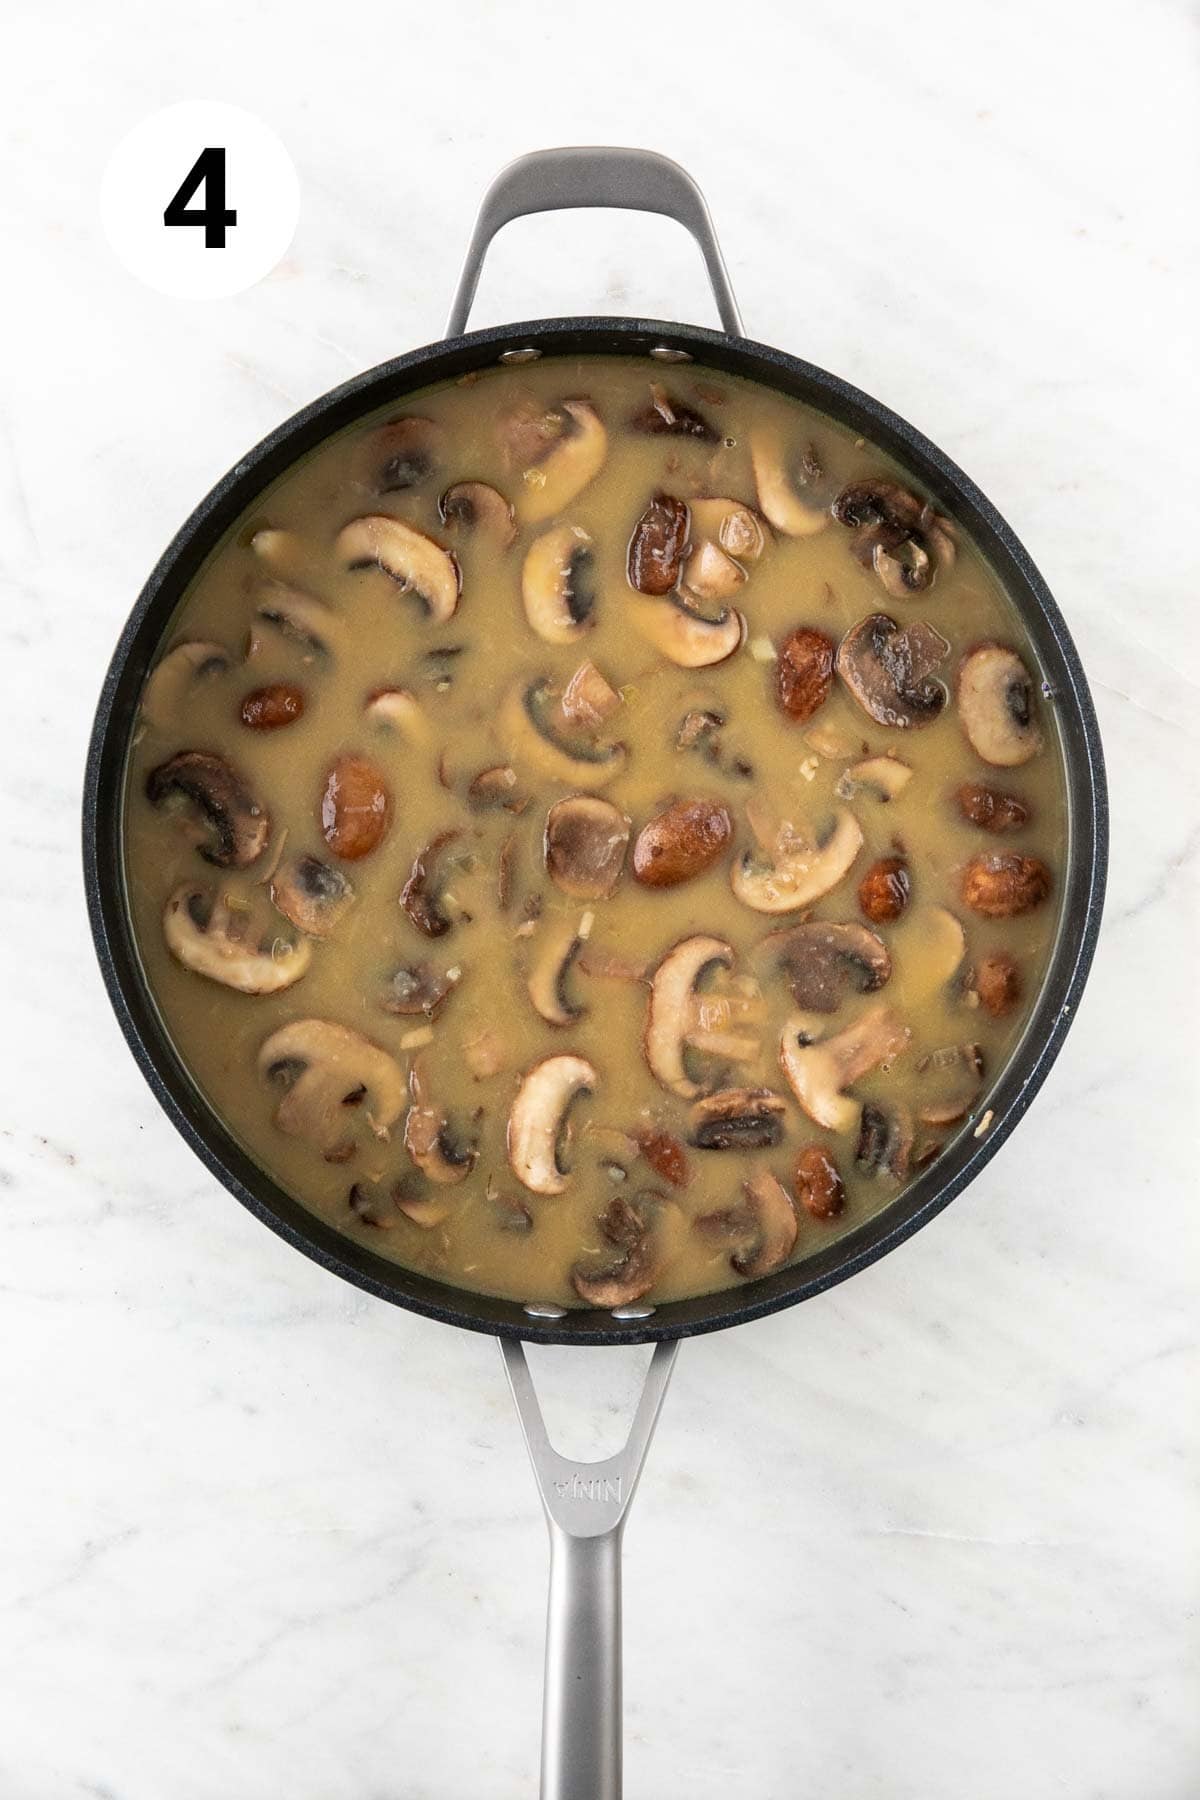 Vegan mushroom gravy without spices before thickening.